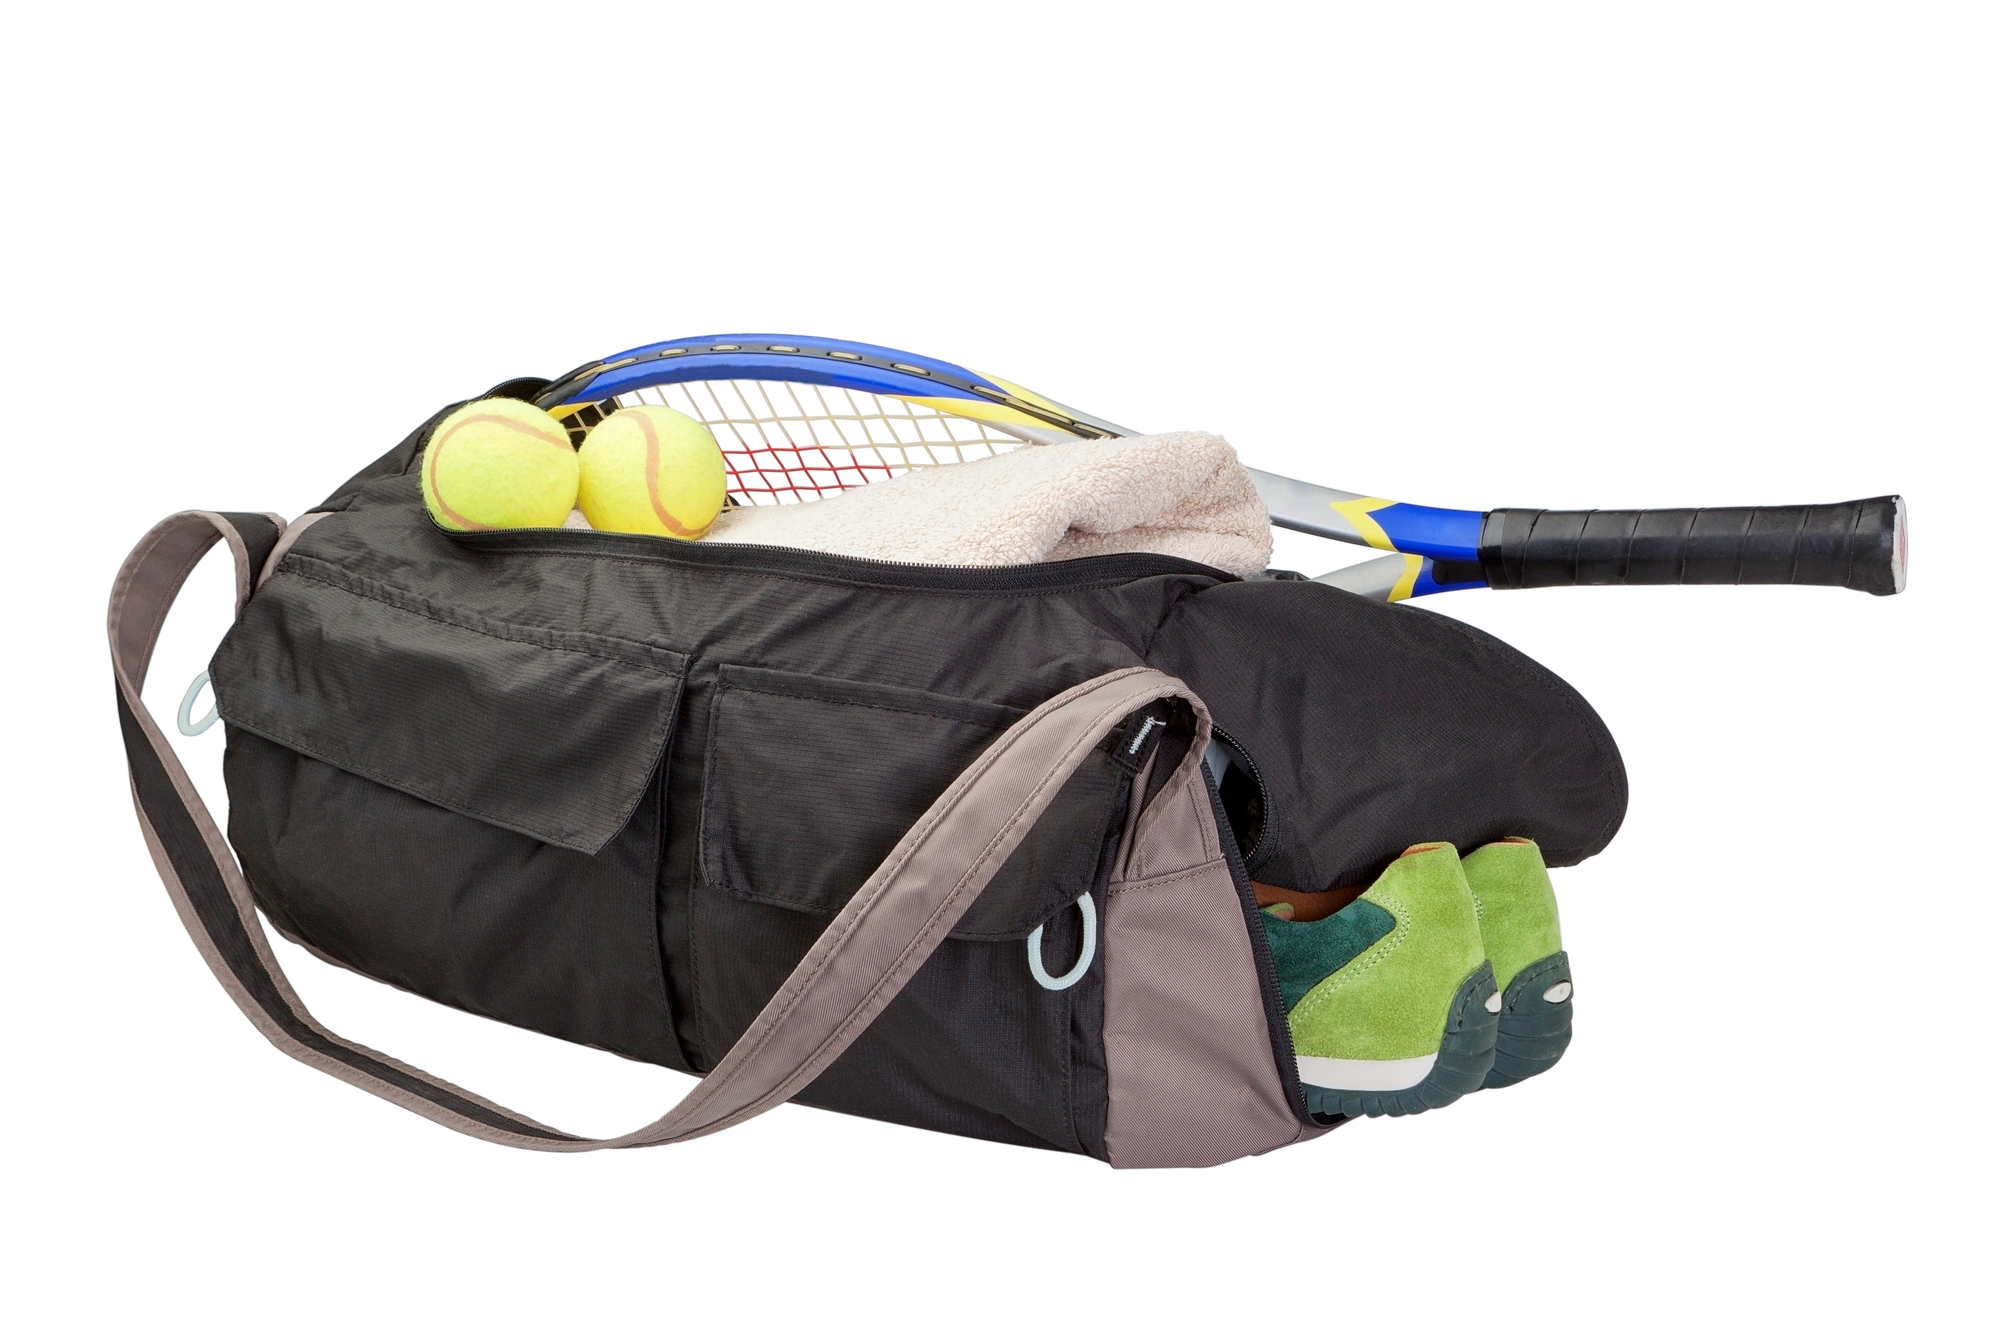 tennis bag with racket, balls, towel and tennis shoes